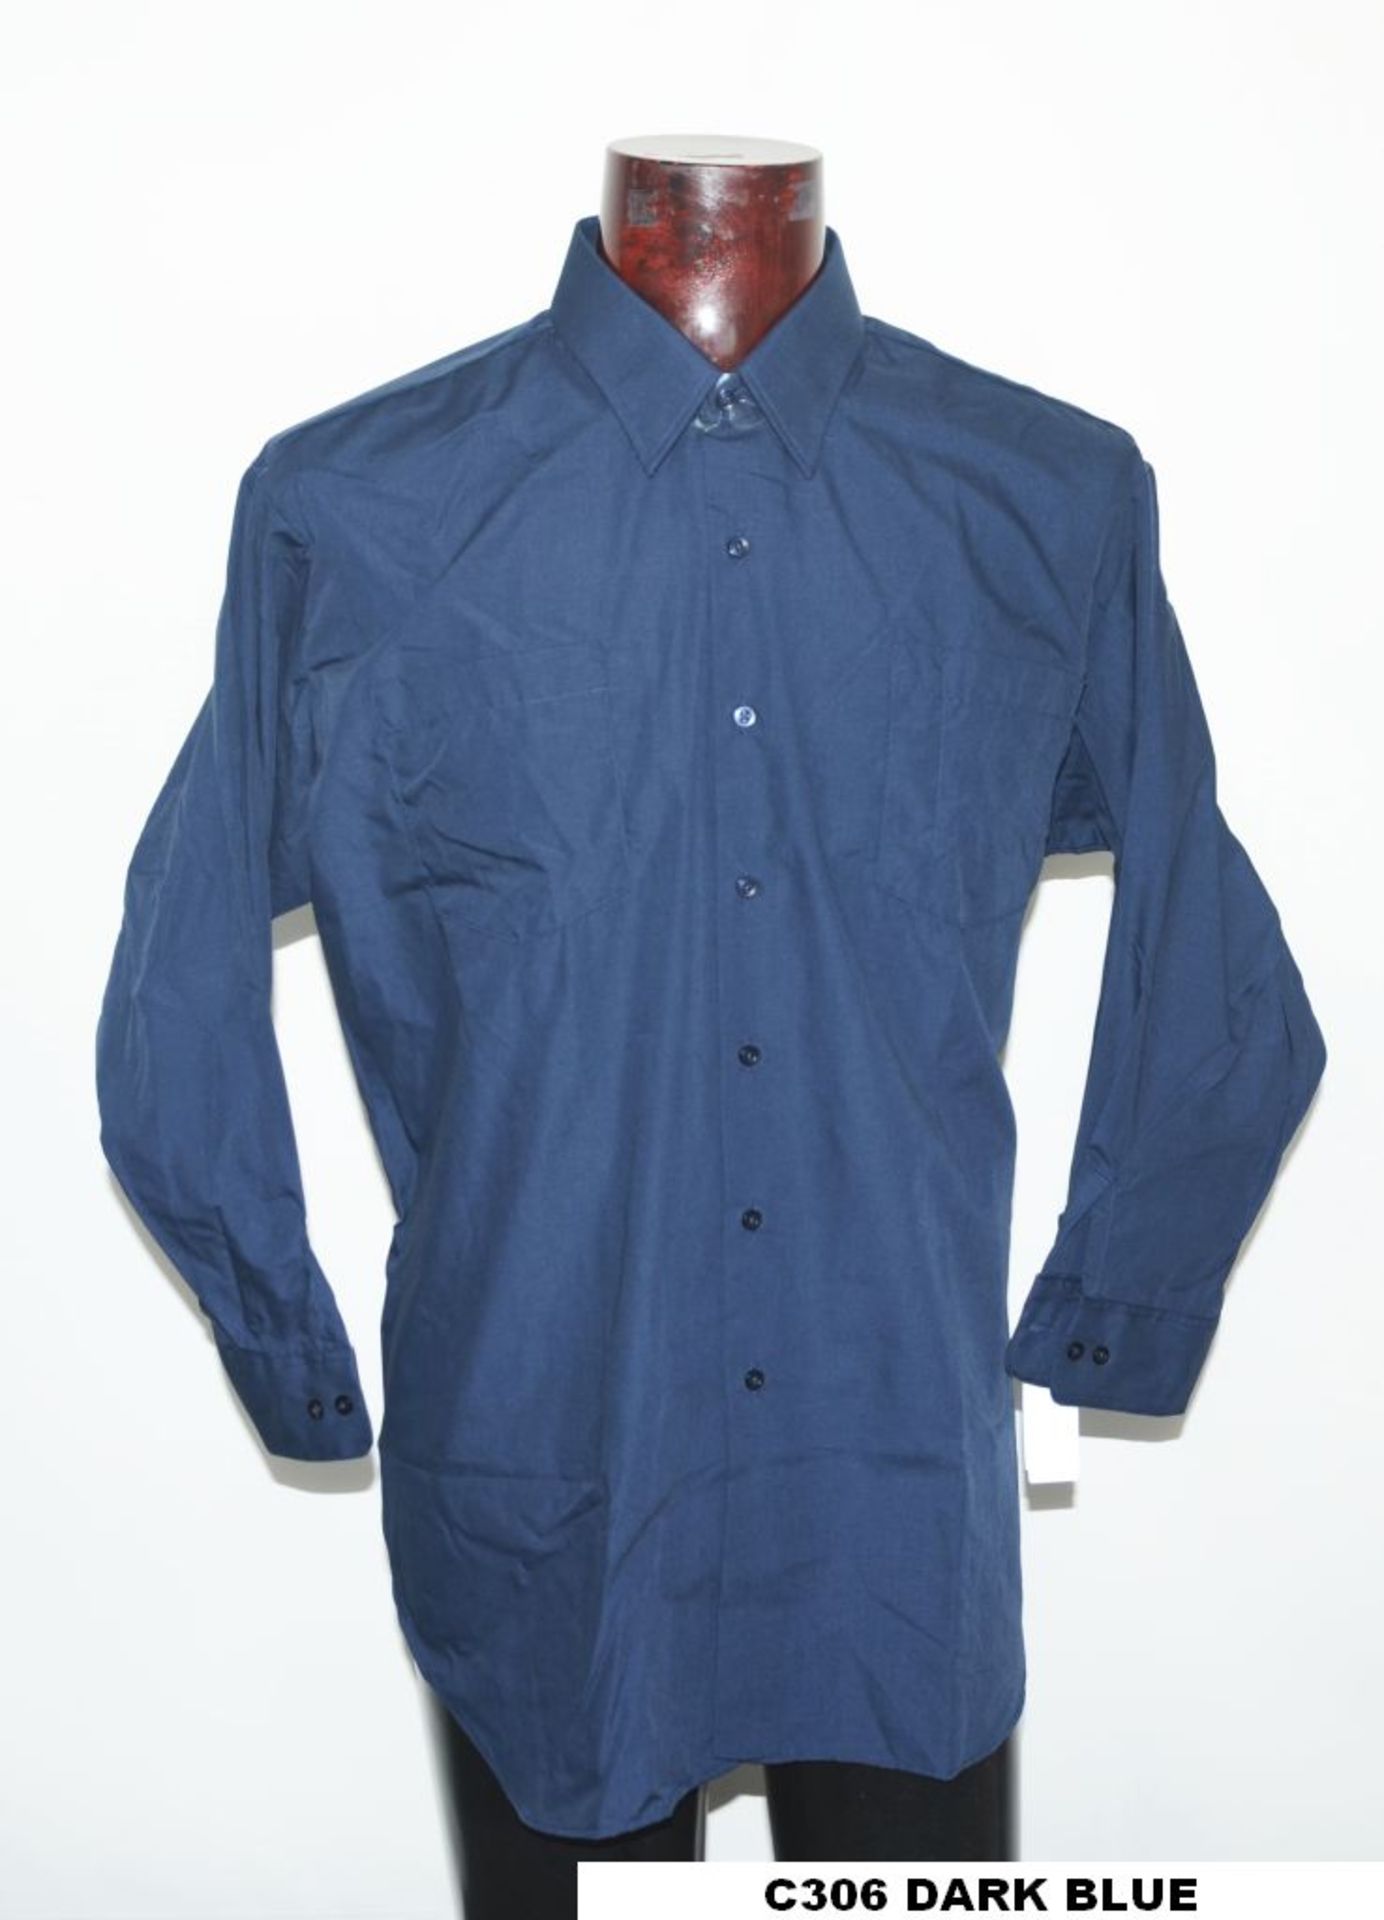 176 x Shirt L/S & S/S / Assorted blue, grey, red and tan / C306 BU